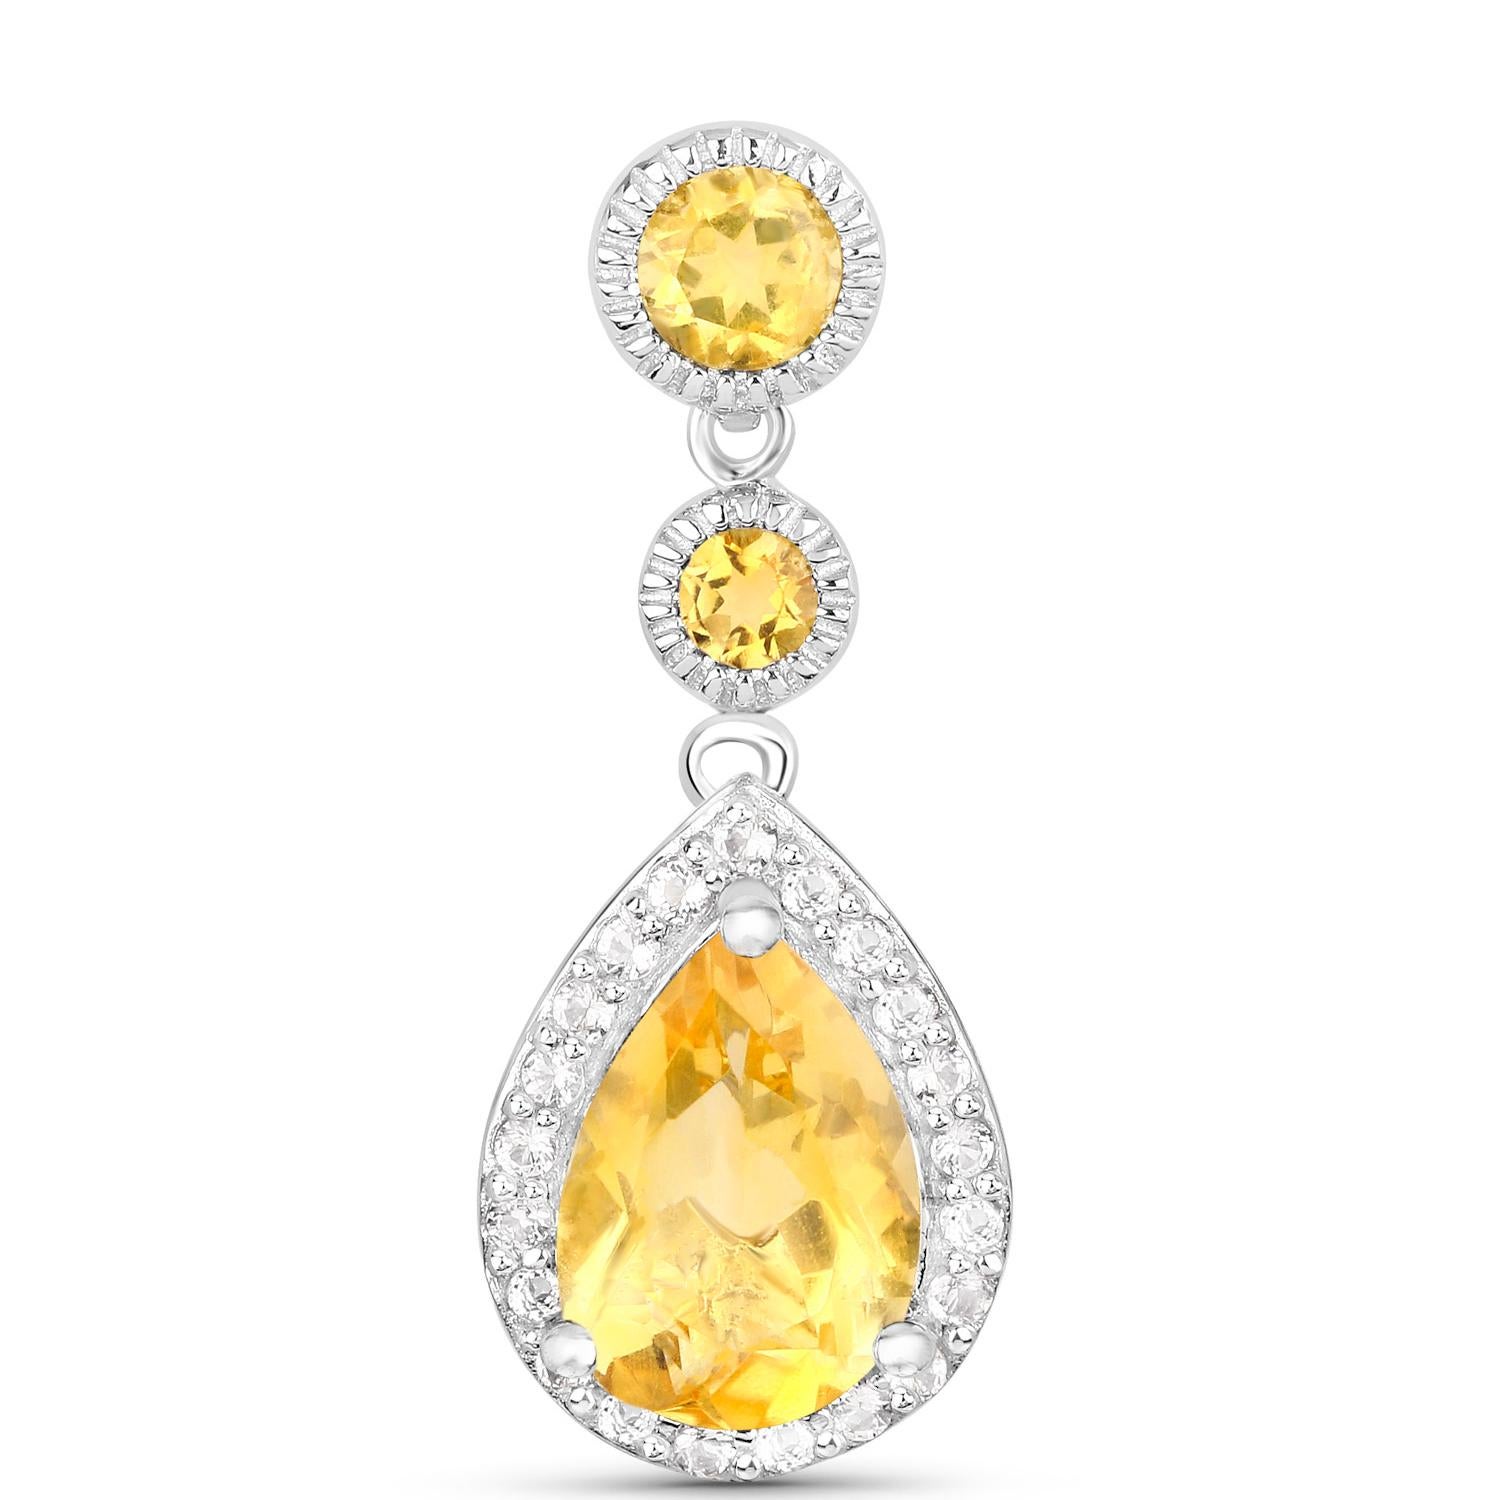 Mixed Cut Citrine Earrings With White Topazes 7.06 Carats Rhodium Plated Sterling Silver For Sale